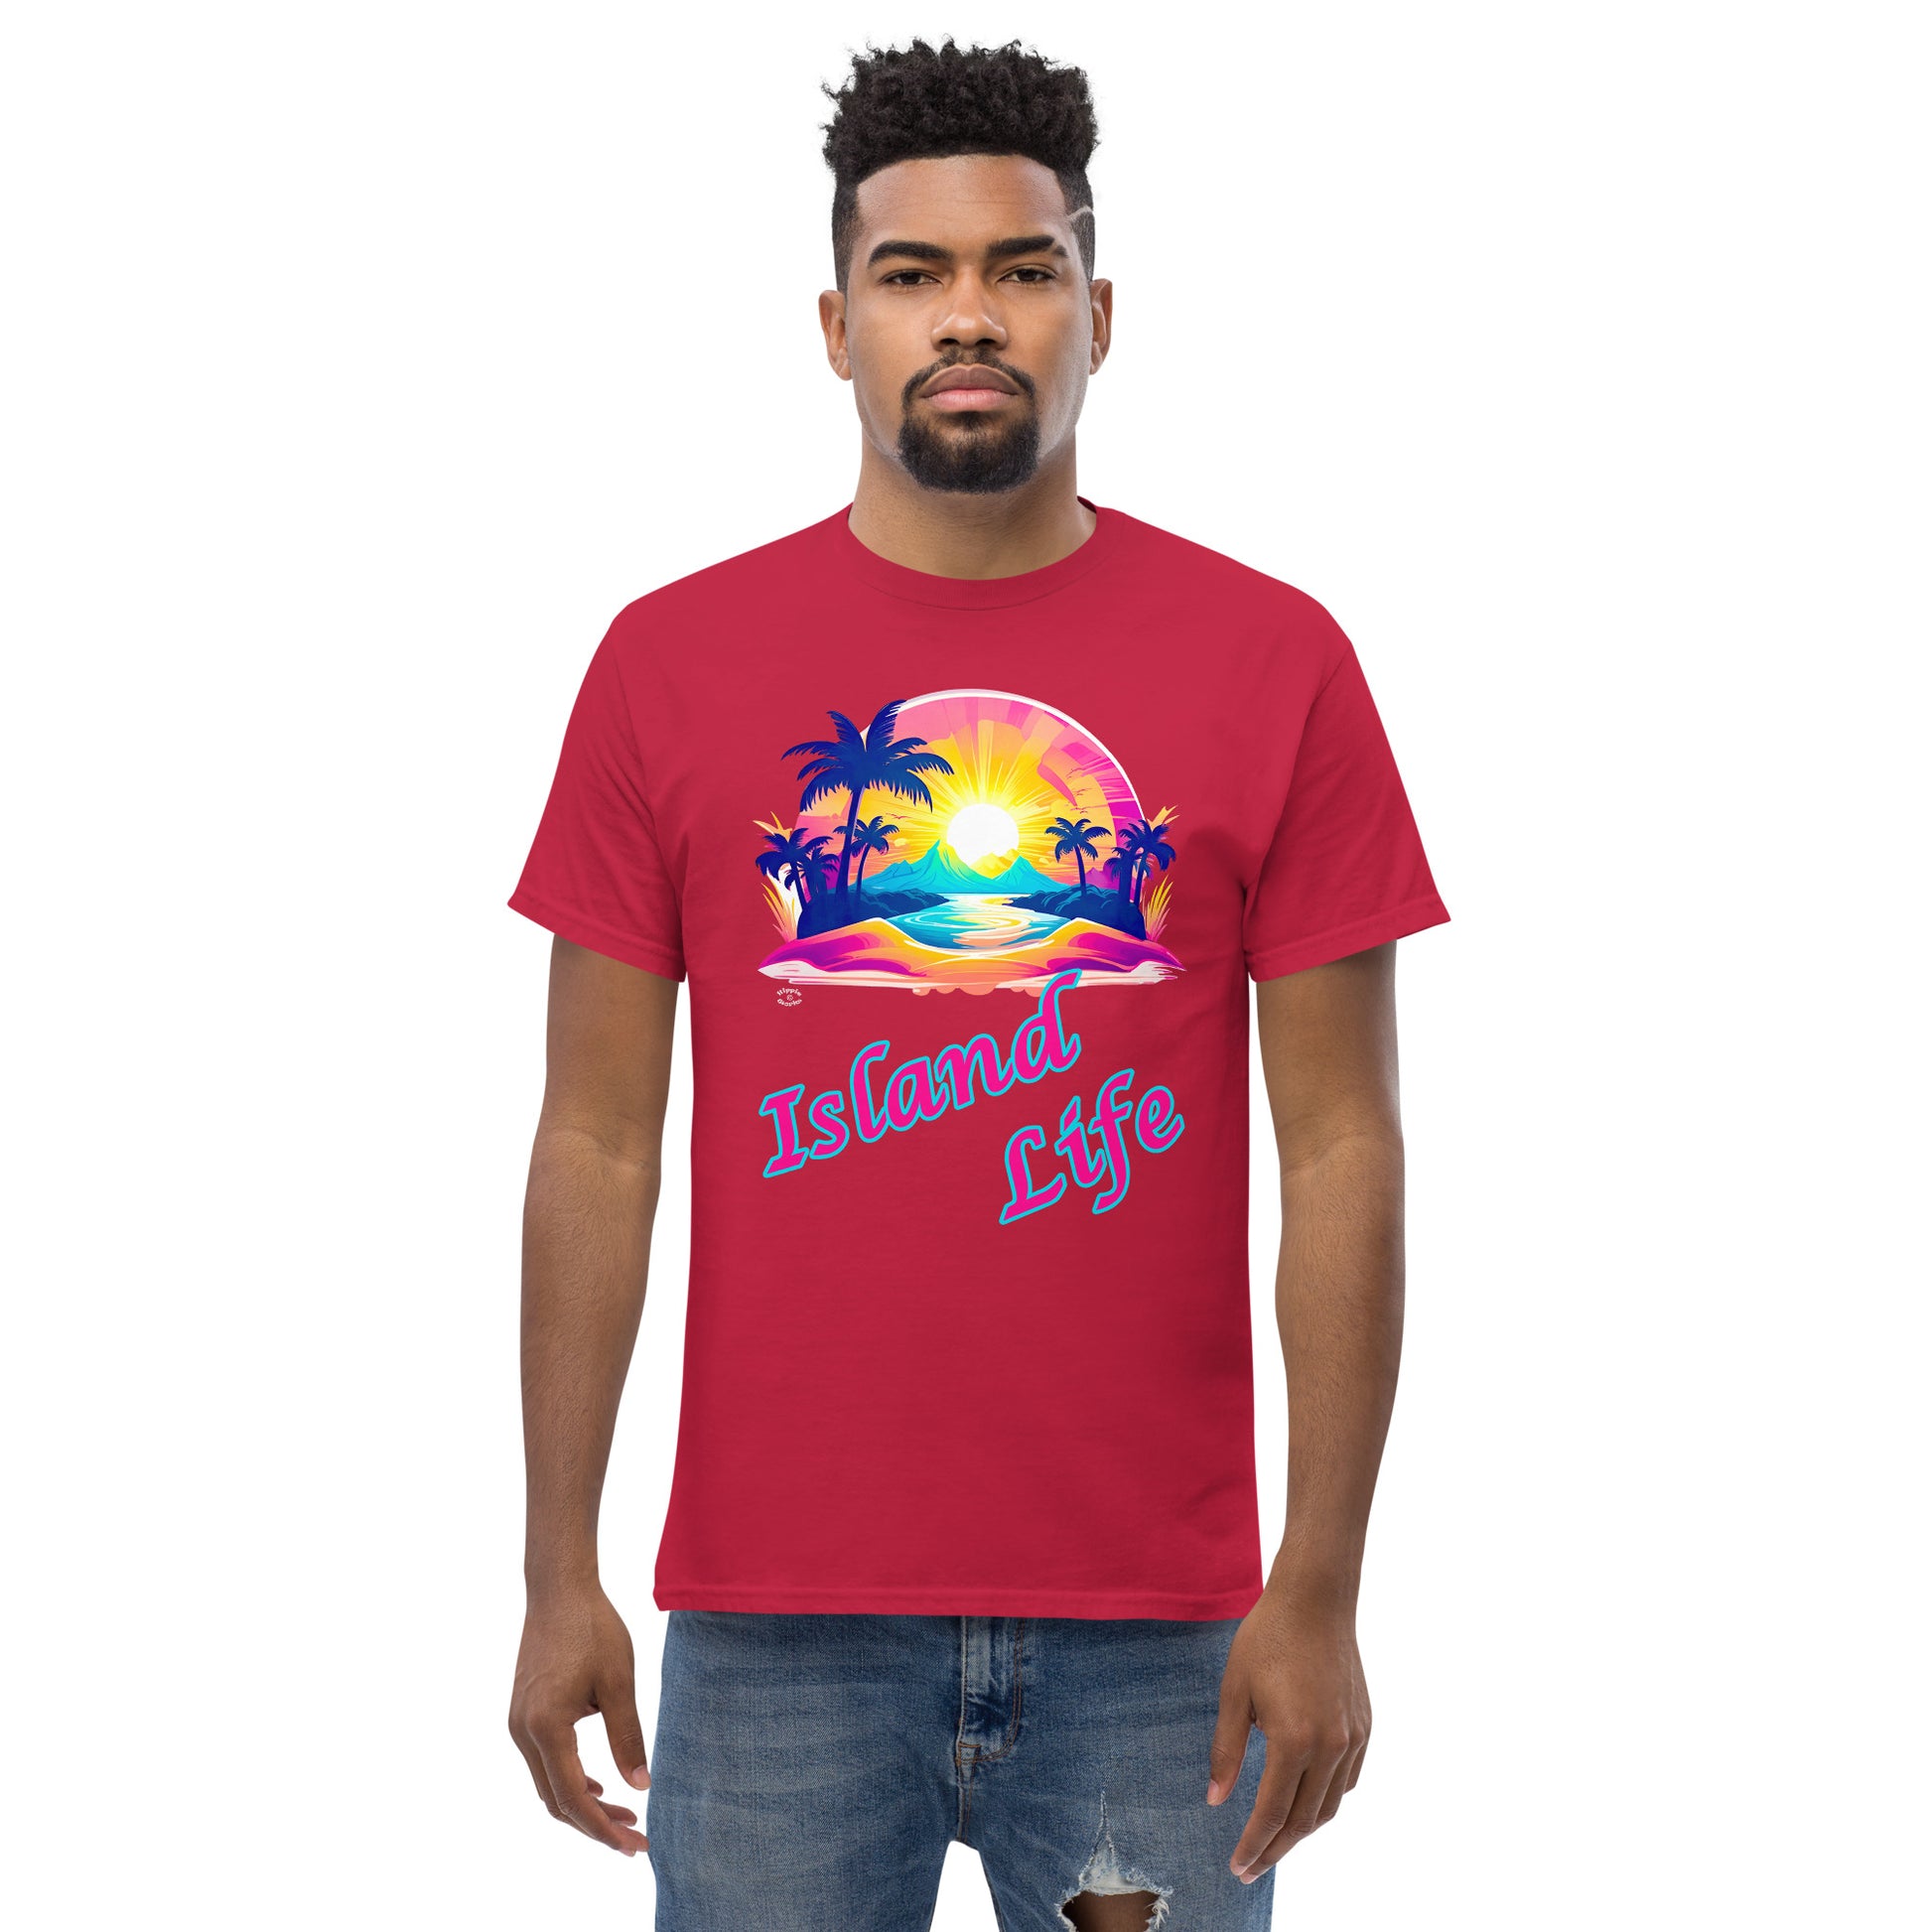 A picture of a man modeling a Men's Classic Tee / Tshirt with a large picture on the front of a tropical island paradise and the text Island Life underneath - front - cardinal